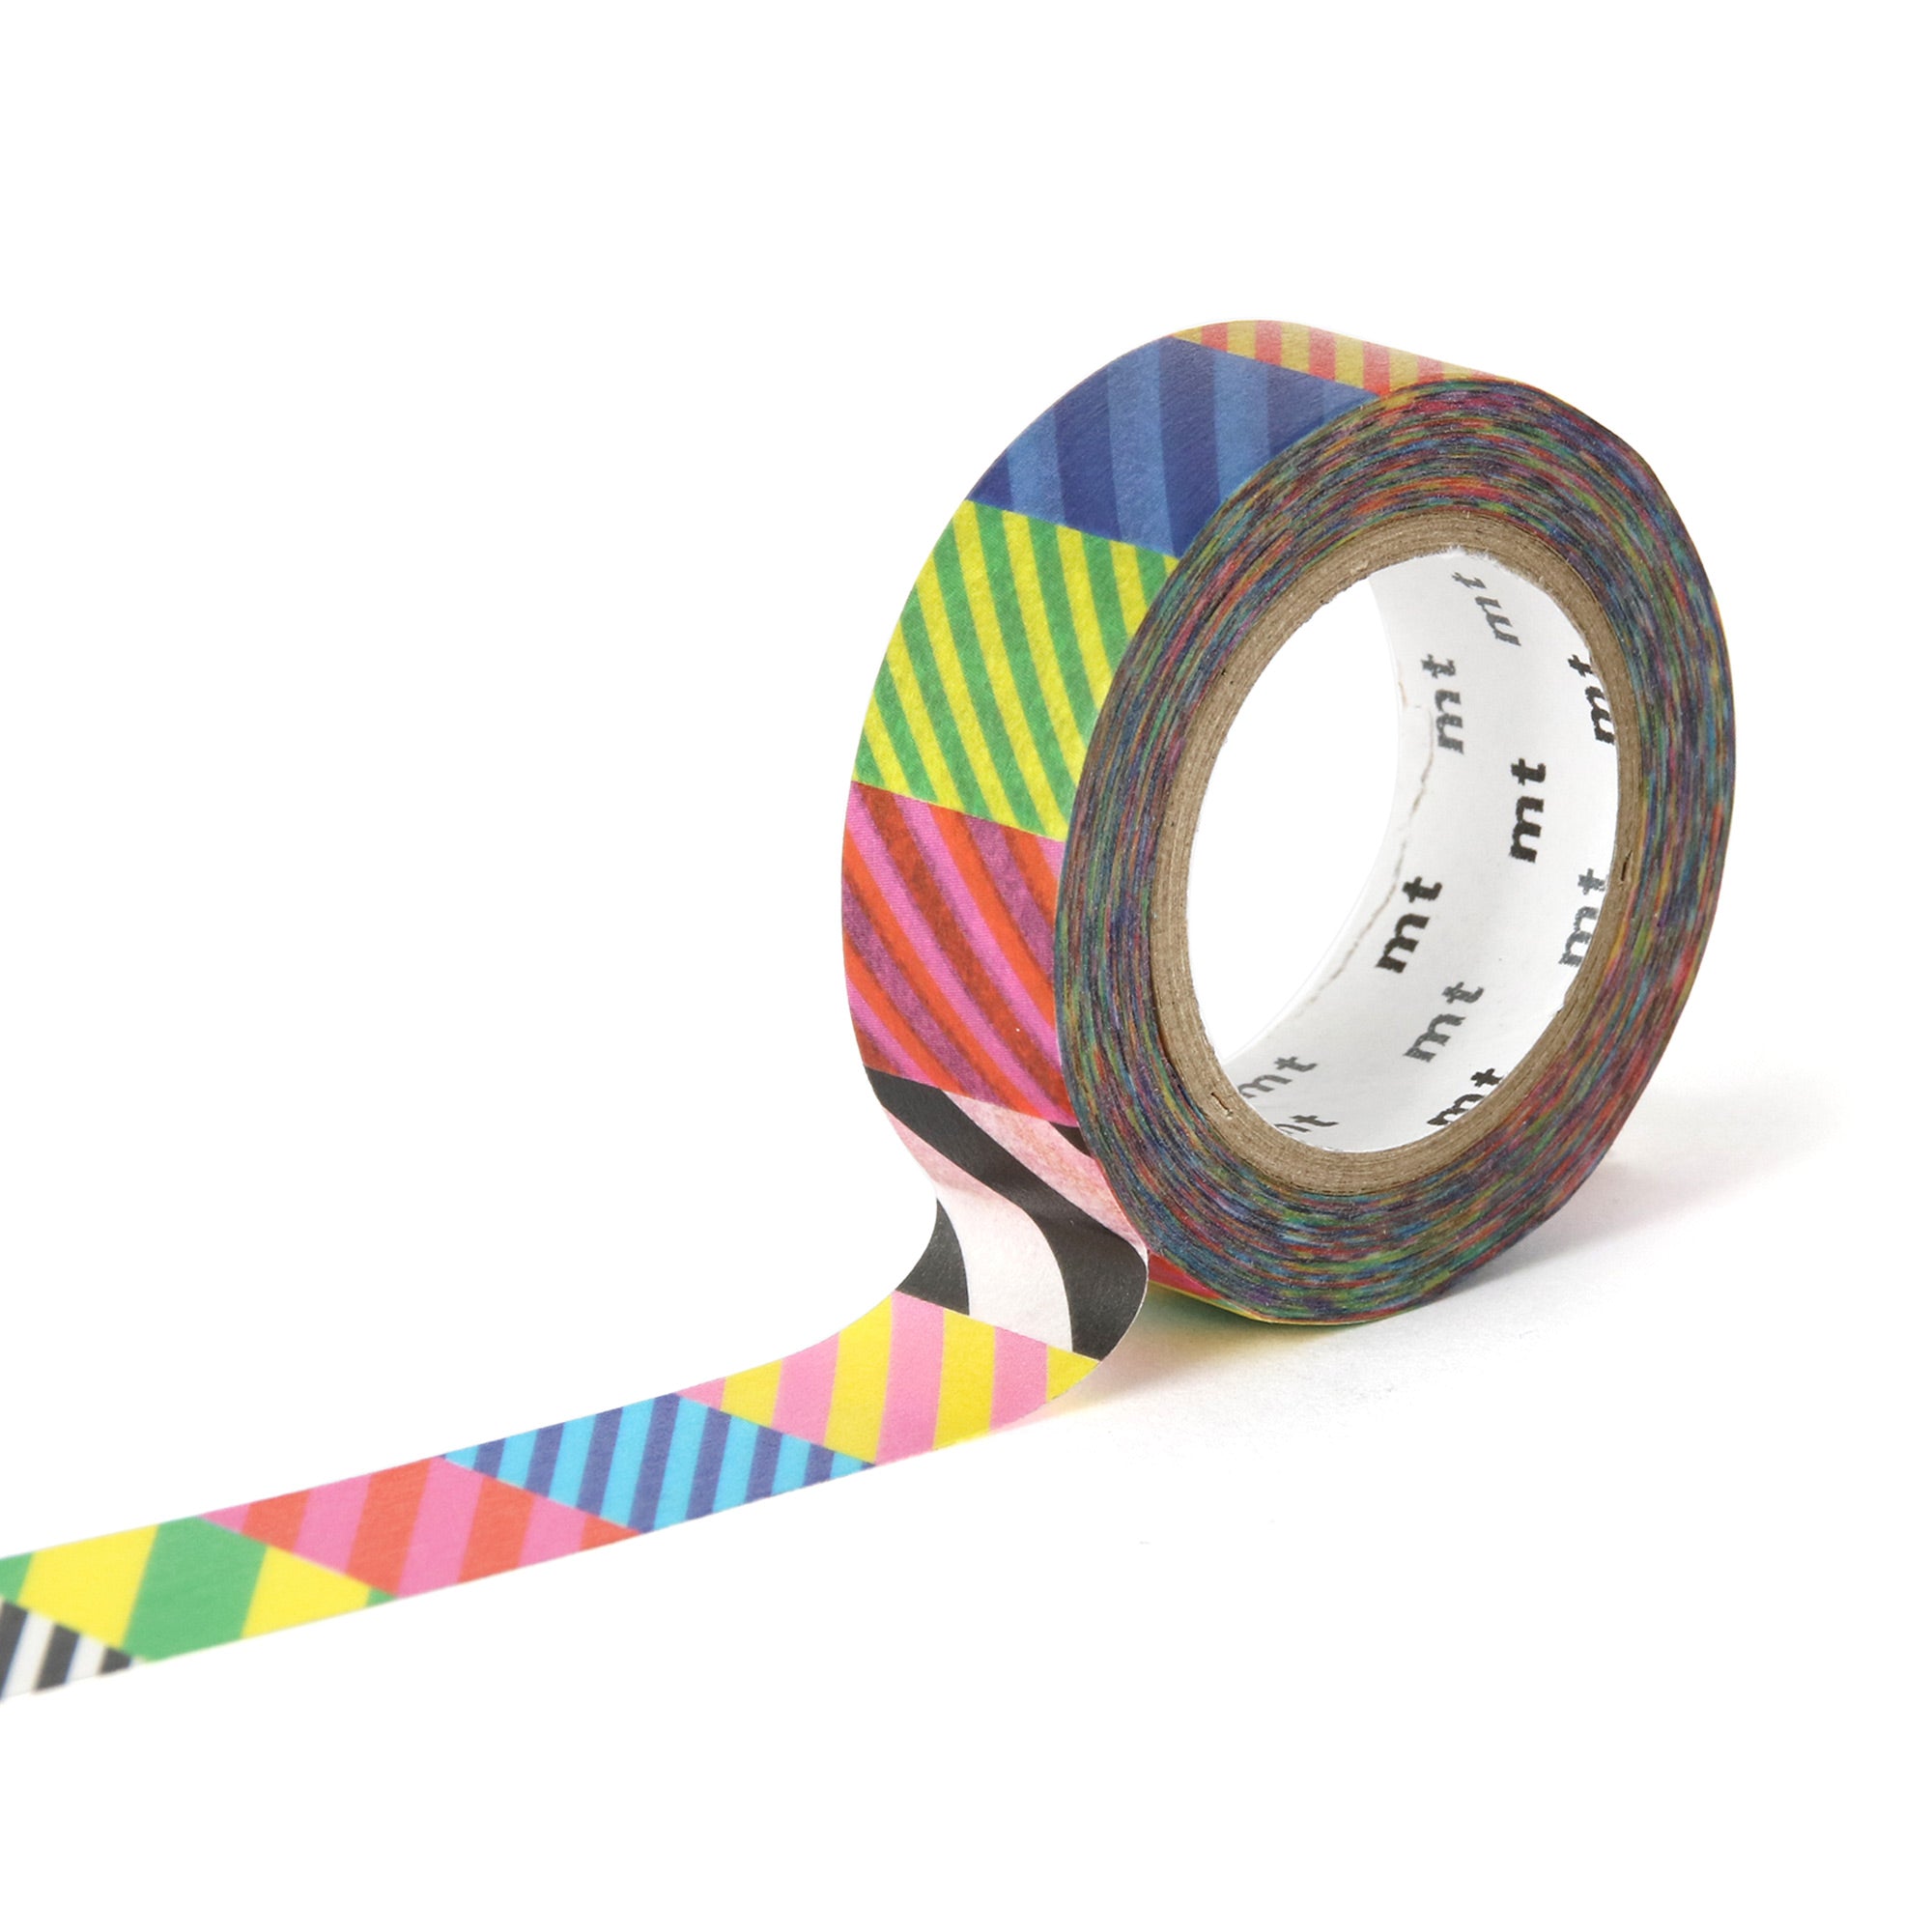 What is the difference between Washi Tape and Masking Tape?